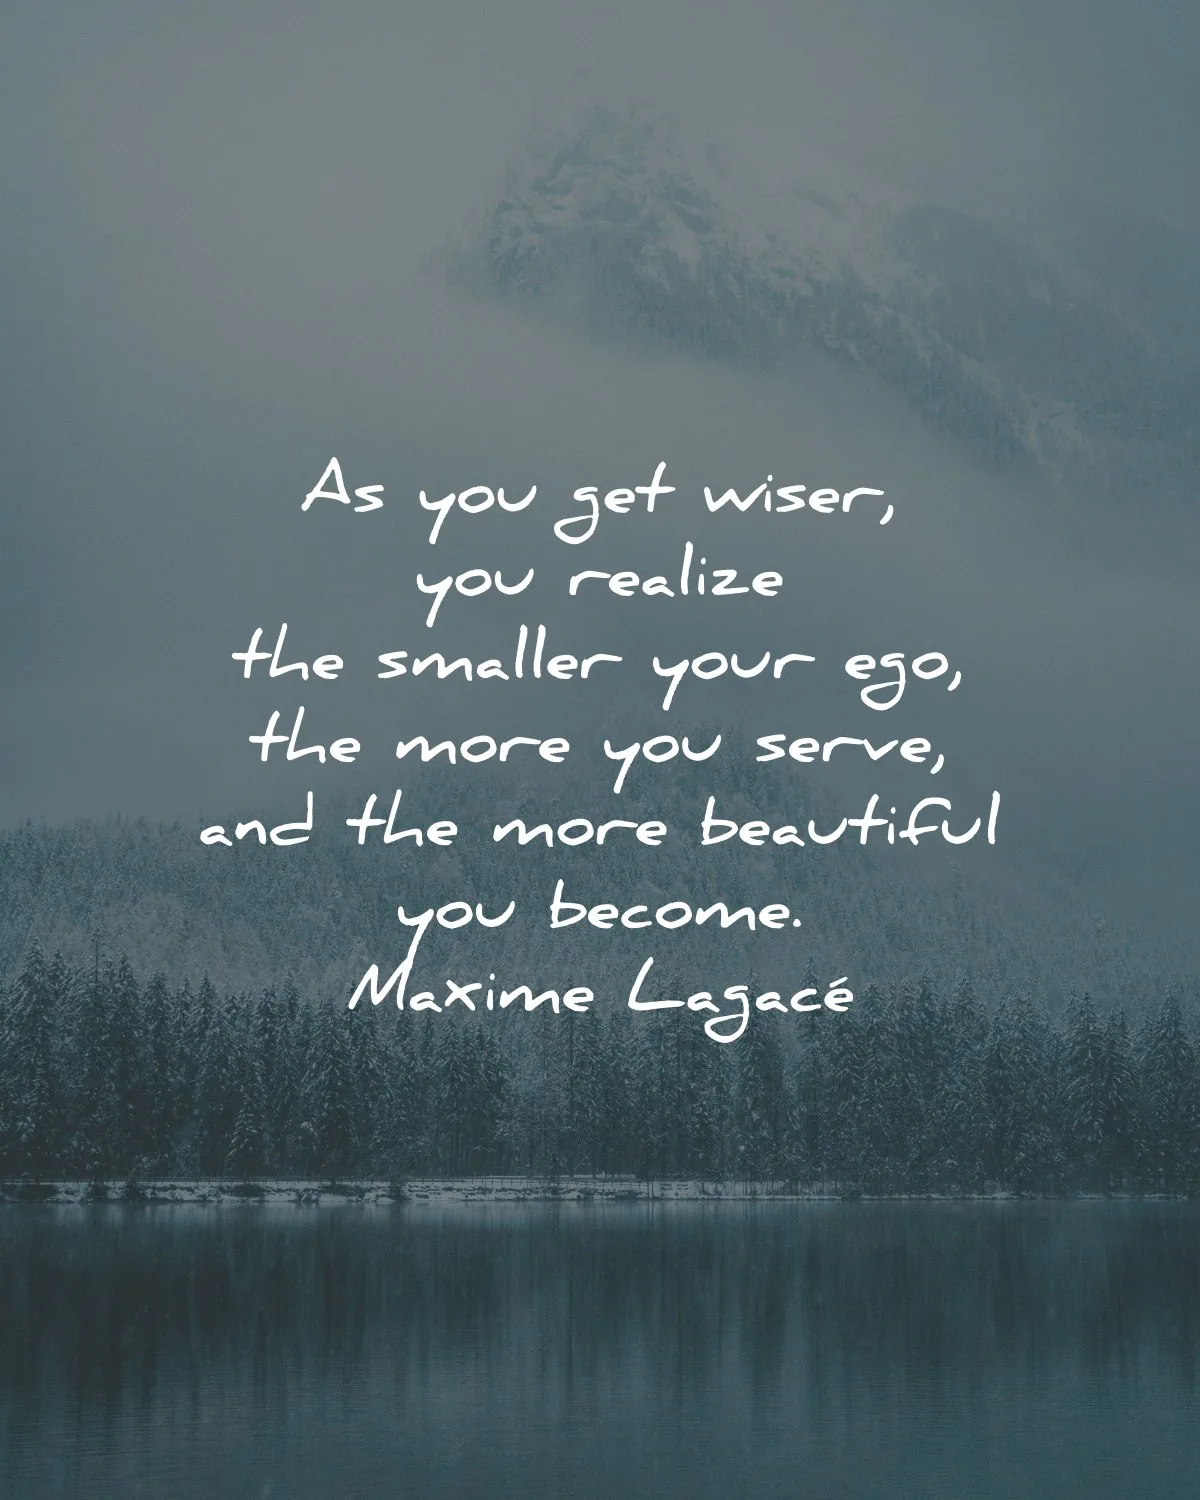 service quotes get wiser realize smaller ego beautiful become maxime lagace wisdom